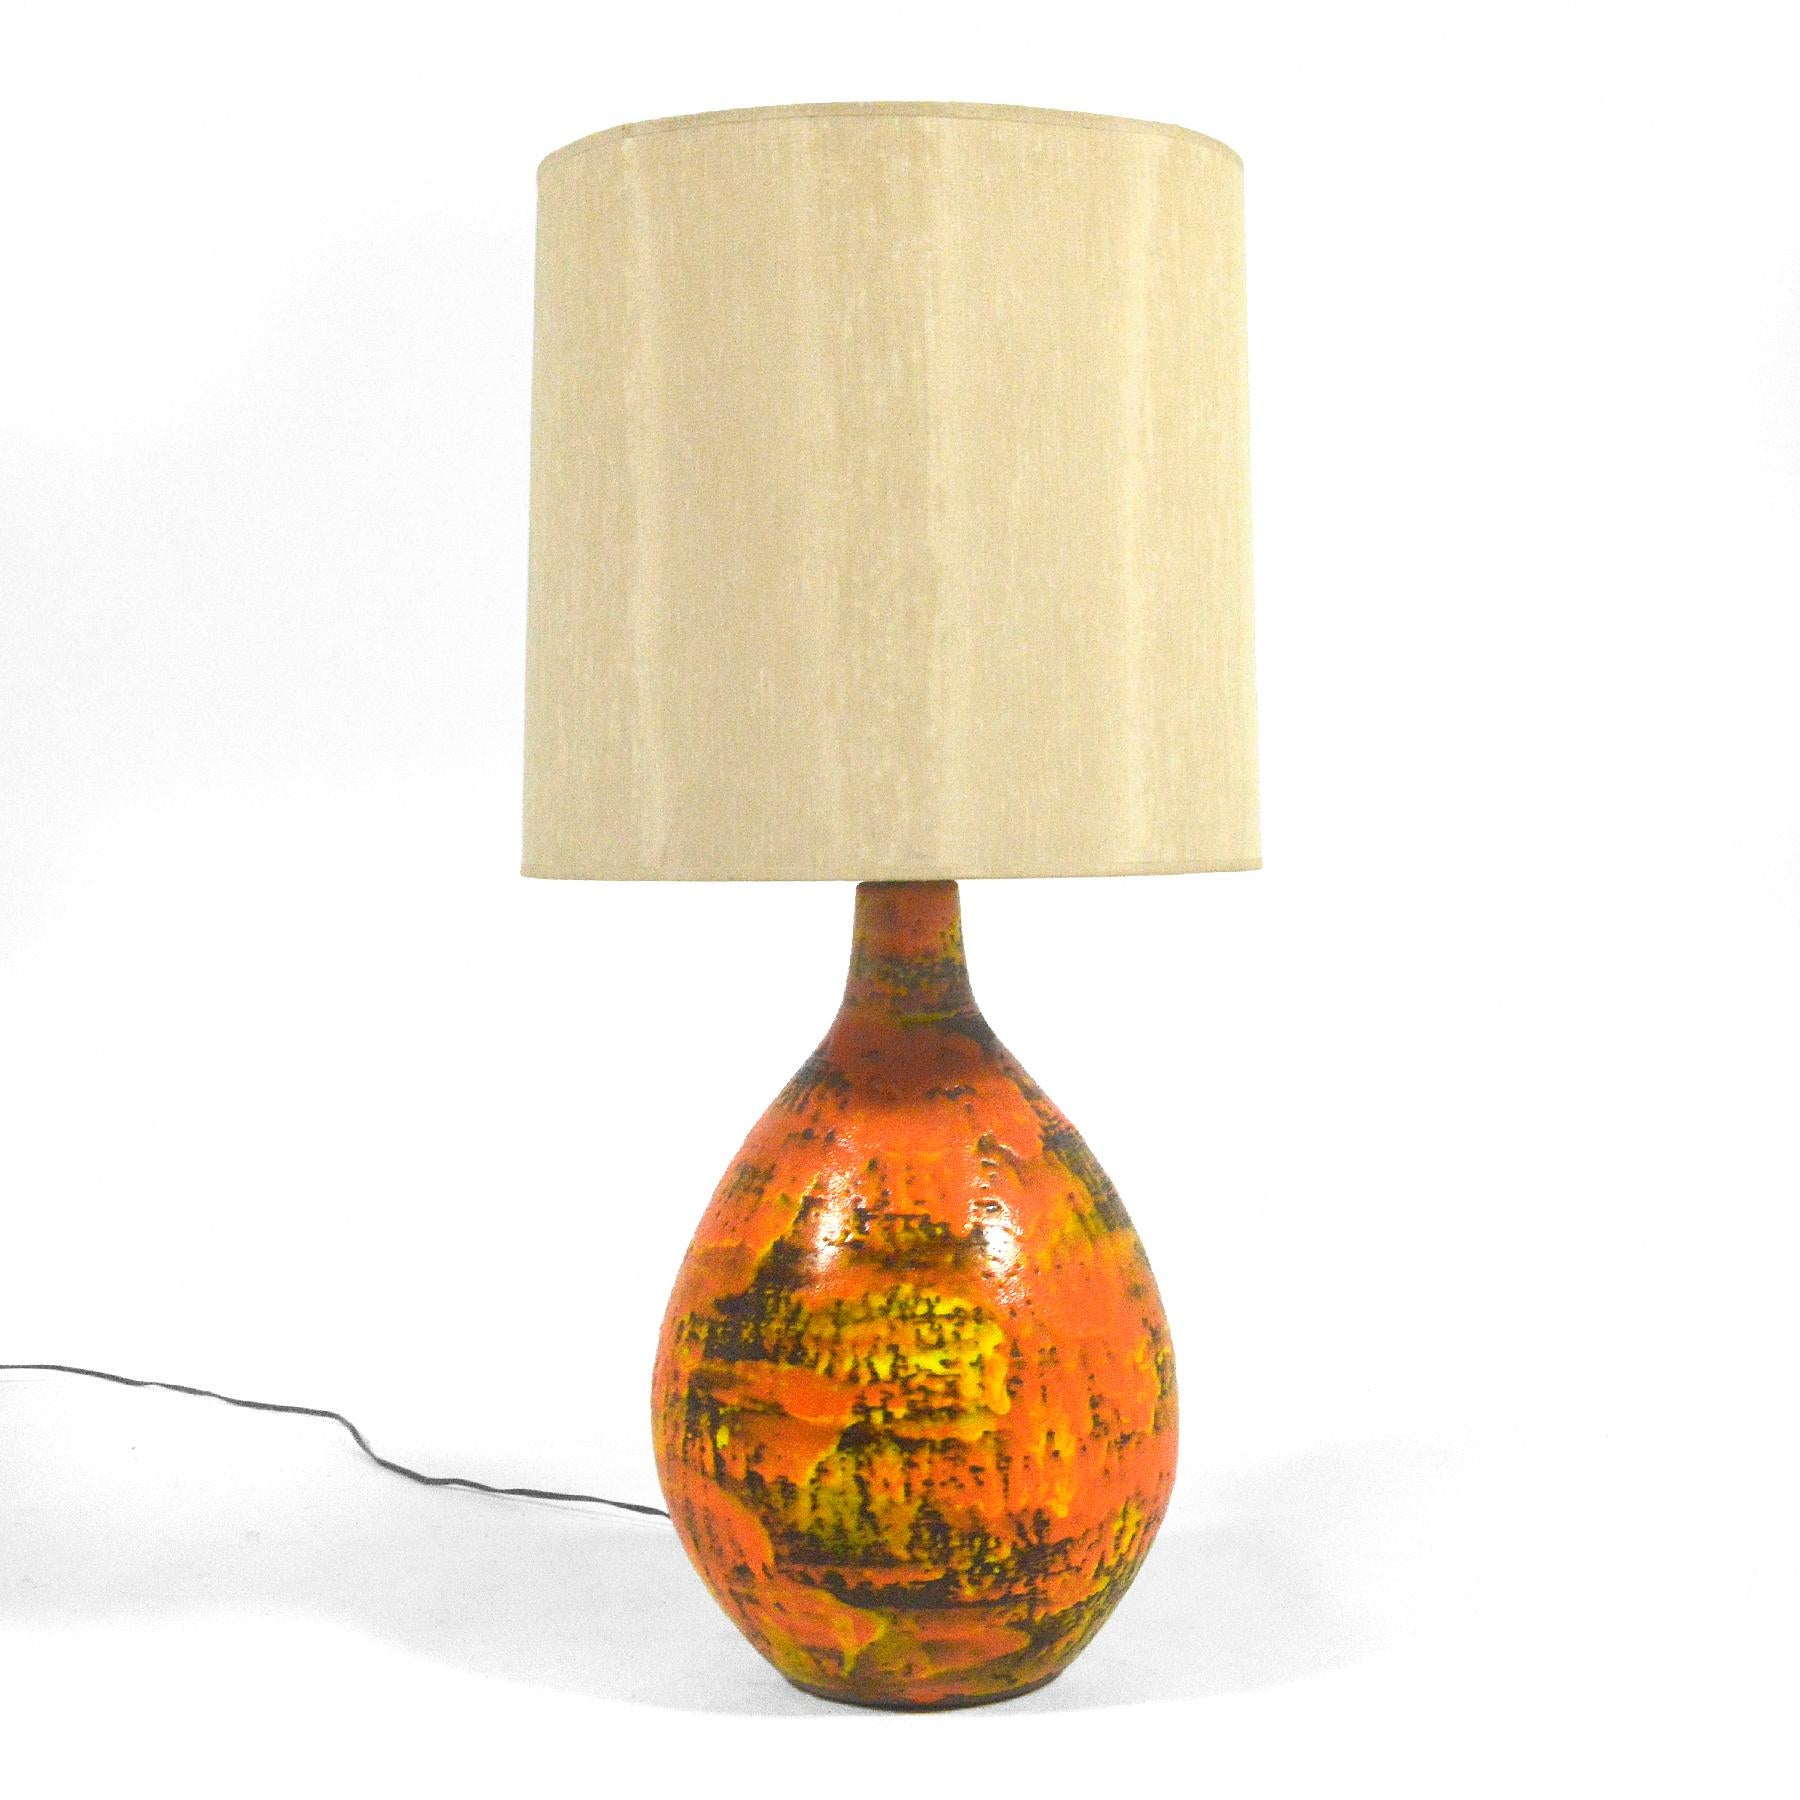 This striking table lamp has many wonderful qualities: a large scale, an elegant teardrop shape, but most of all– the vivid, variegated glaze in yellow, orange and dark brown. The rich glaze reminds us of Fantoni's beautiful works in